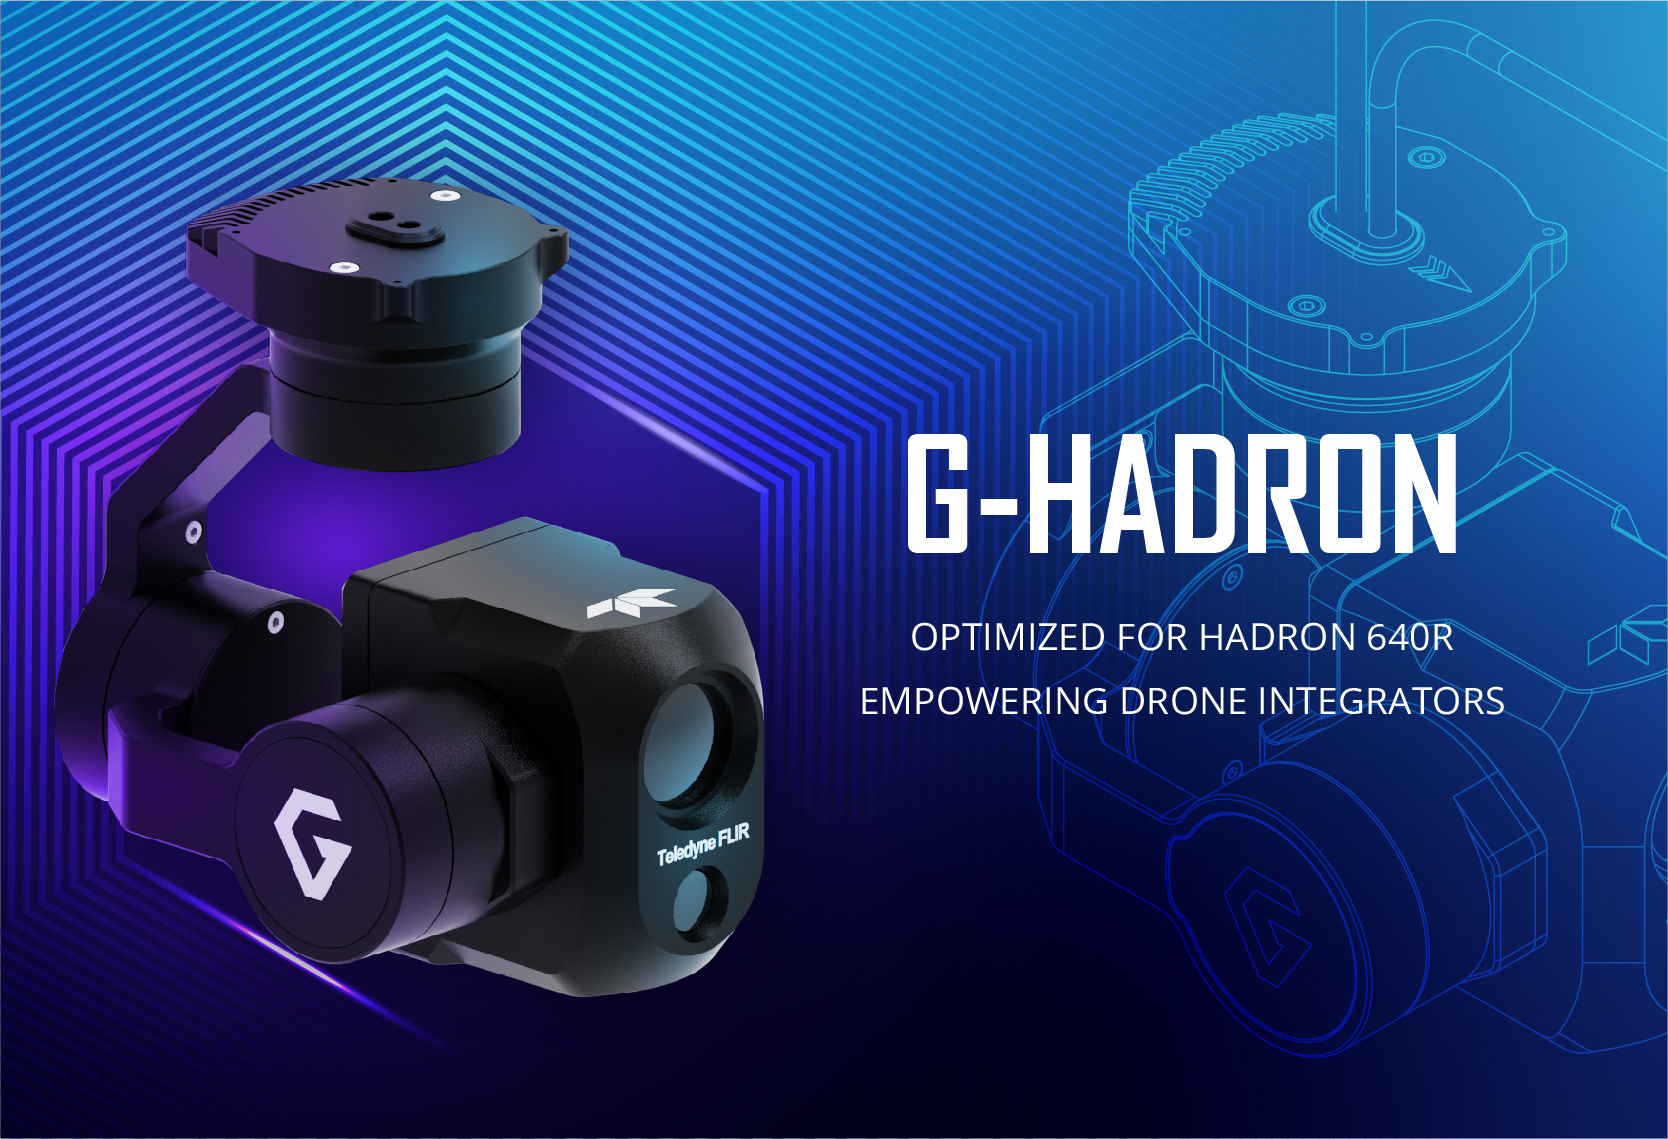 GREMSY INTRODUCES G-HADRON SOLUTION FOR DRONE INTEGRATORS